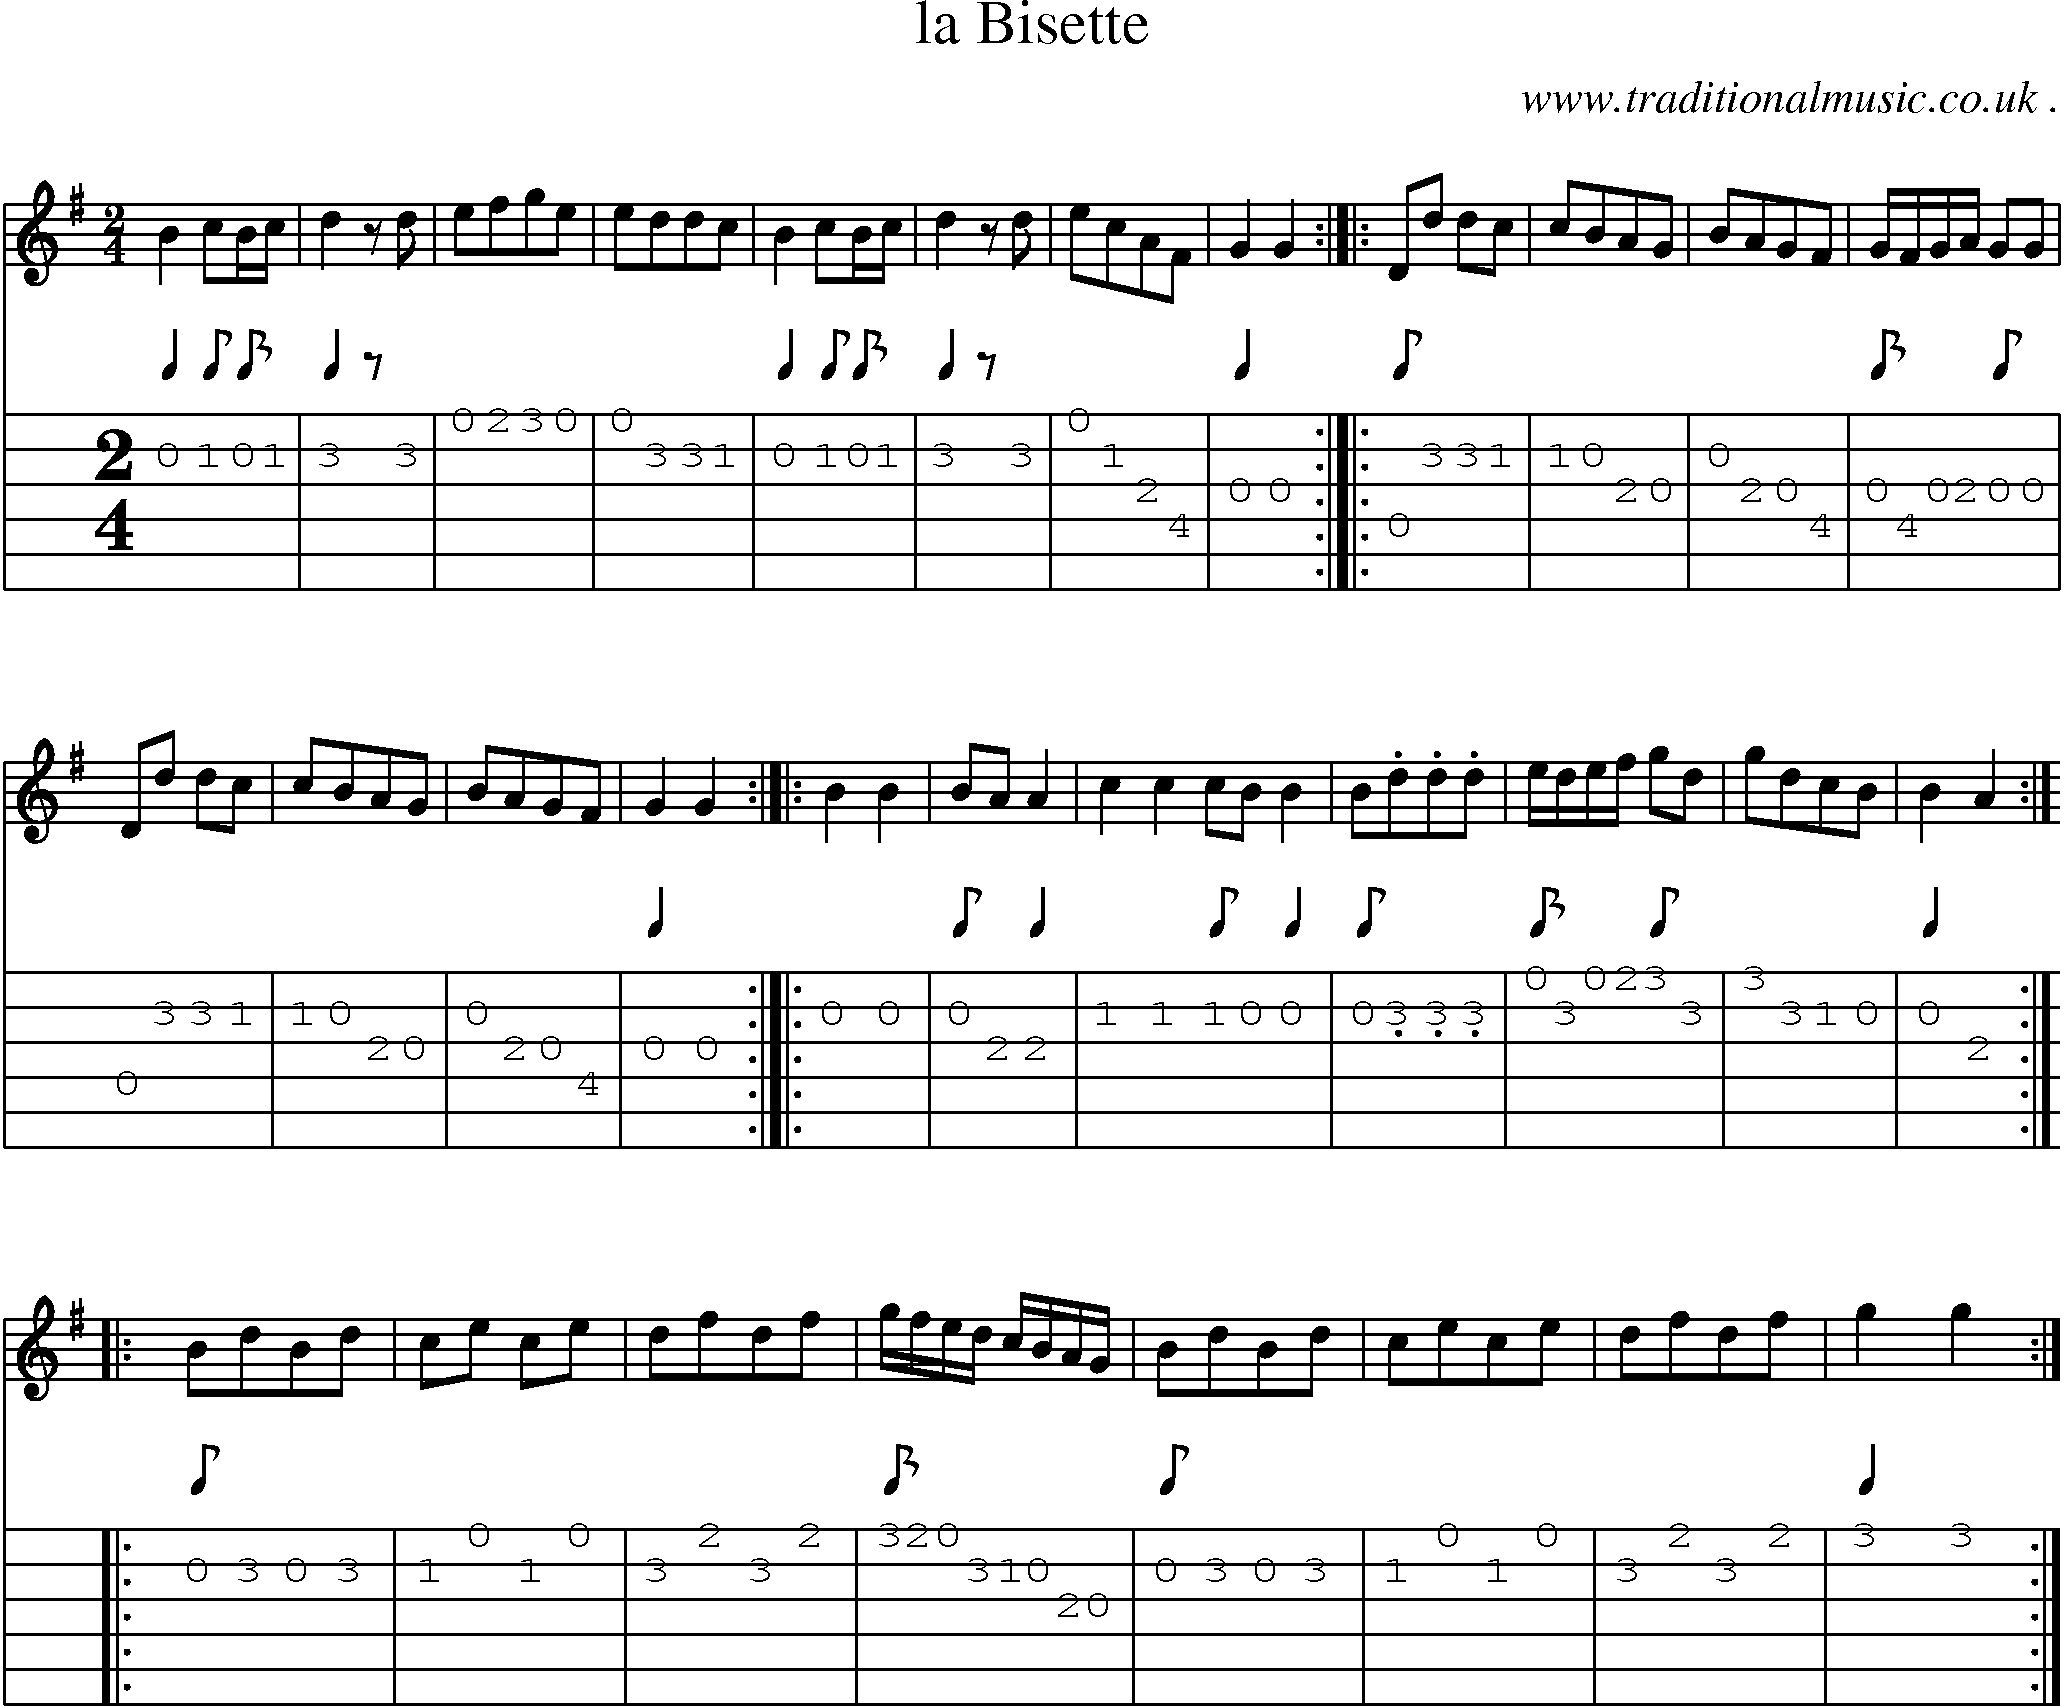 Sheet-Music and Guitar Tabs for La Bisette